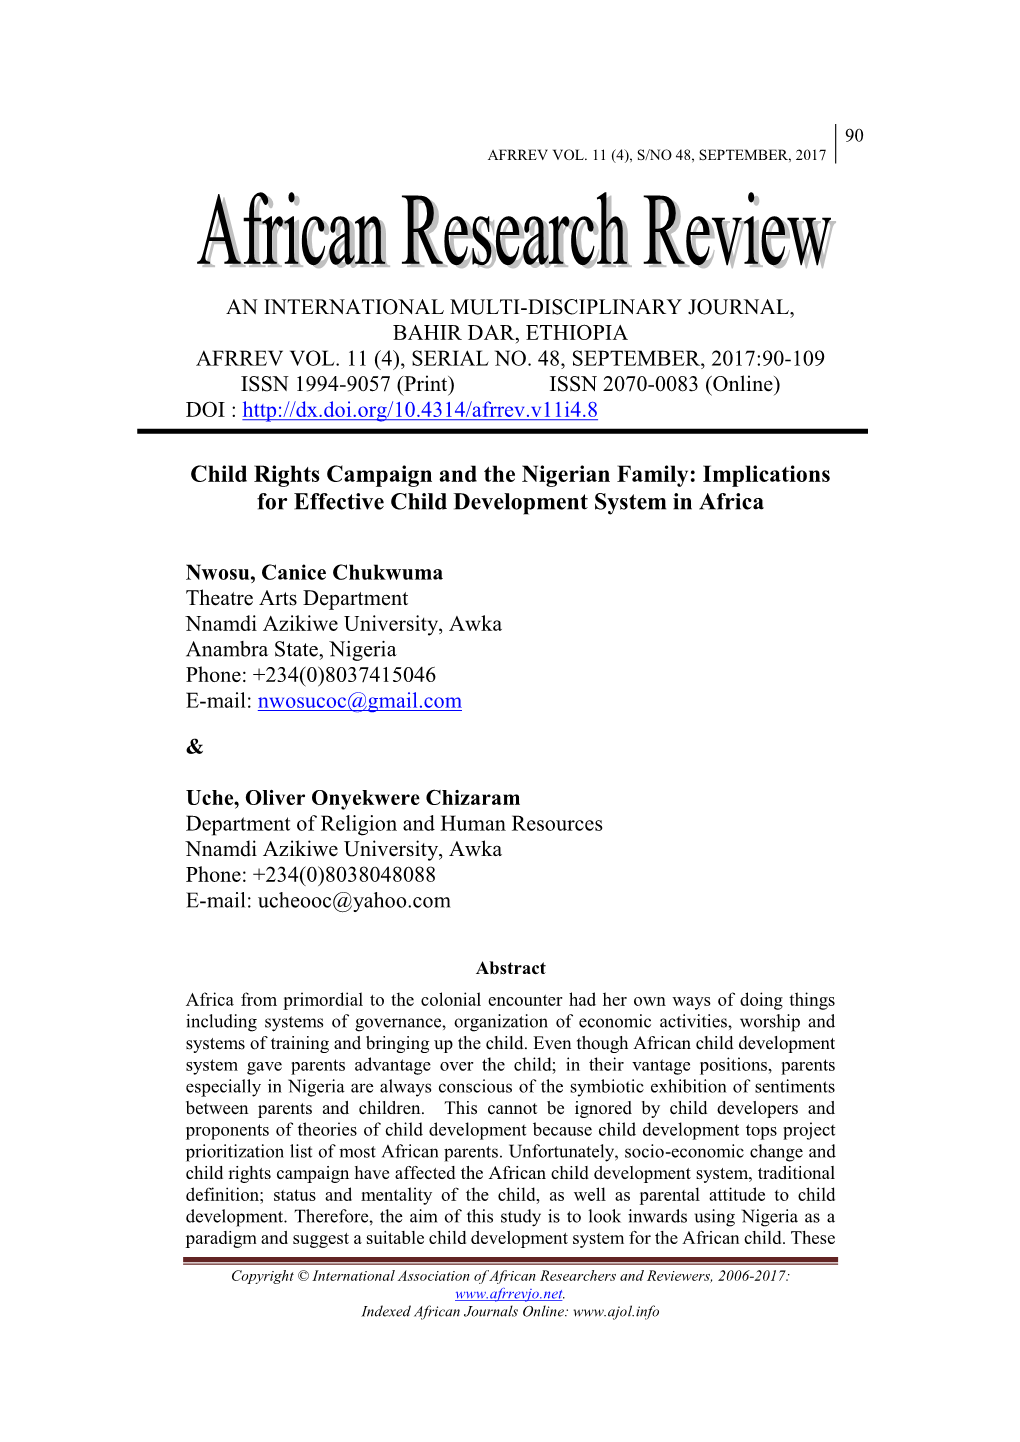 Implications for Effective Child Development System in Africa